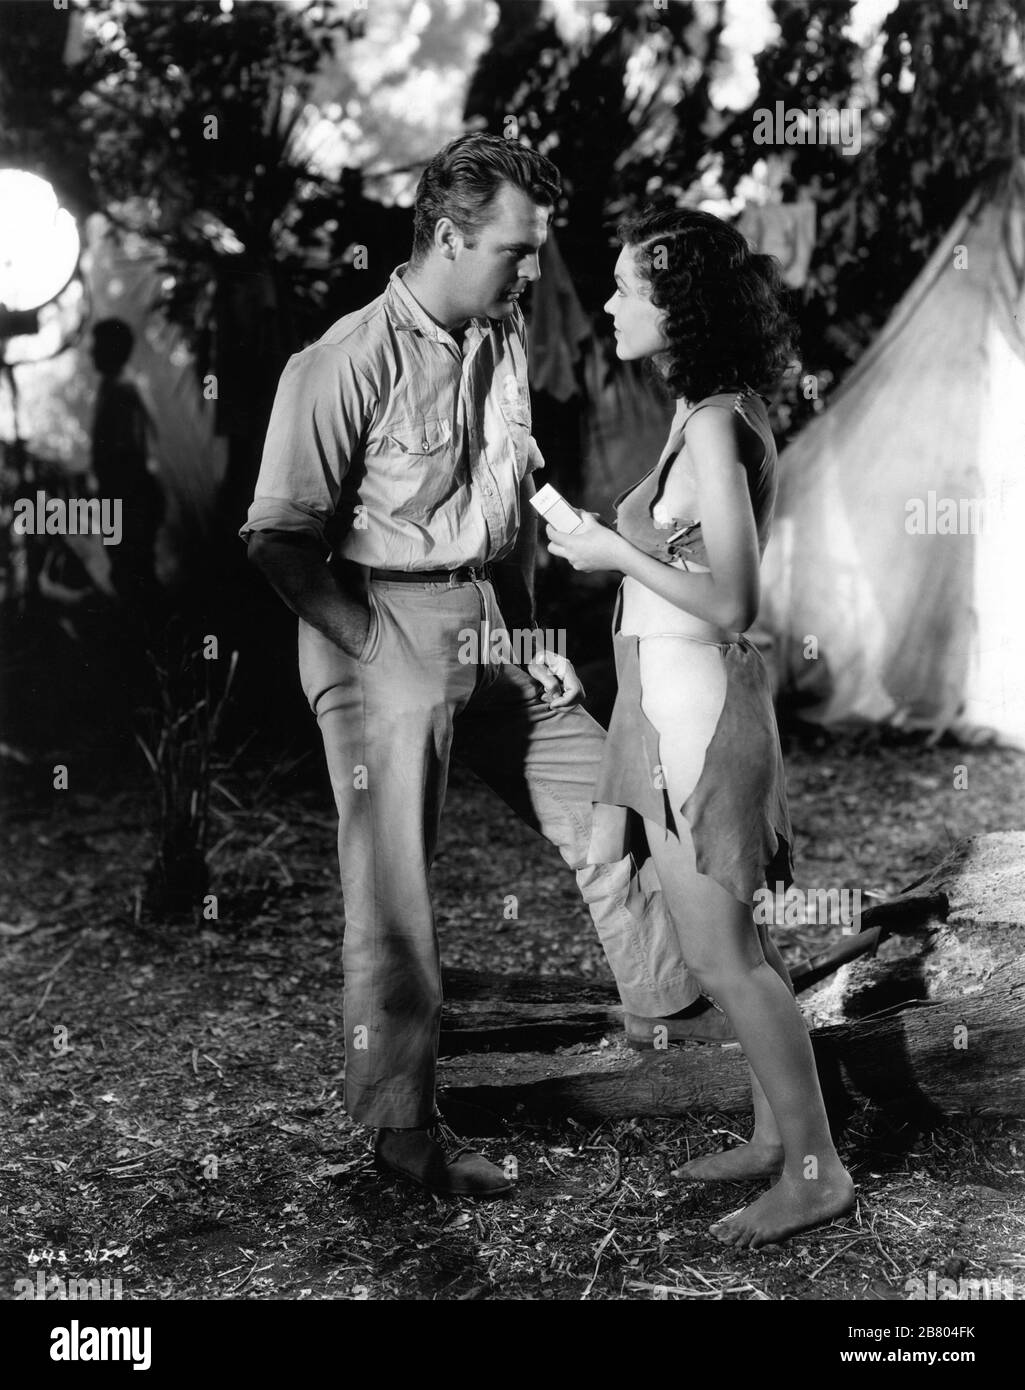 NEIL HAMILTON as Harry Holt and MAUREEN O'SULLIVAN as Jane Parker pose for publicity still with crew member and movie light in background during filming of TARZAN AND HIS MATE 1934 directors CEDRIC GIBBONS and JACK CONWAY characters EDGAR RICE BURROUGHS Photo by TED ALLAN Metro Goldwyn Mayer Stock Photo